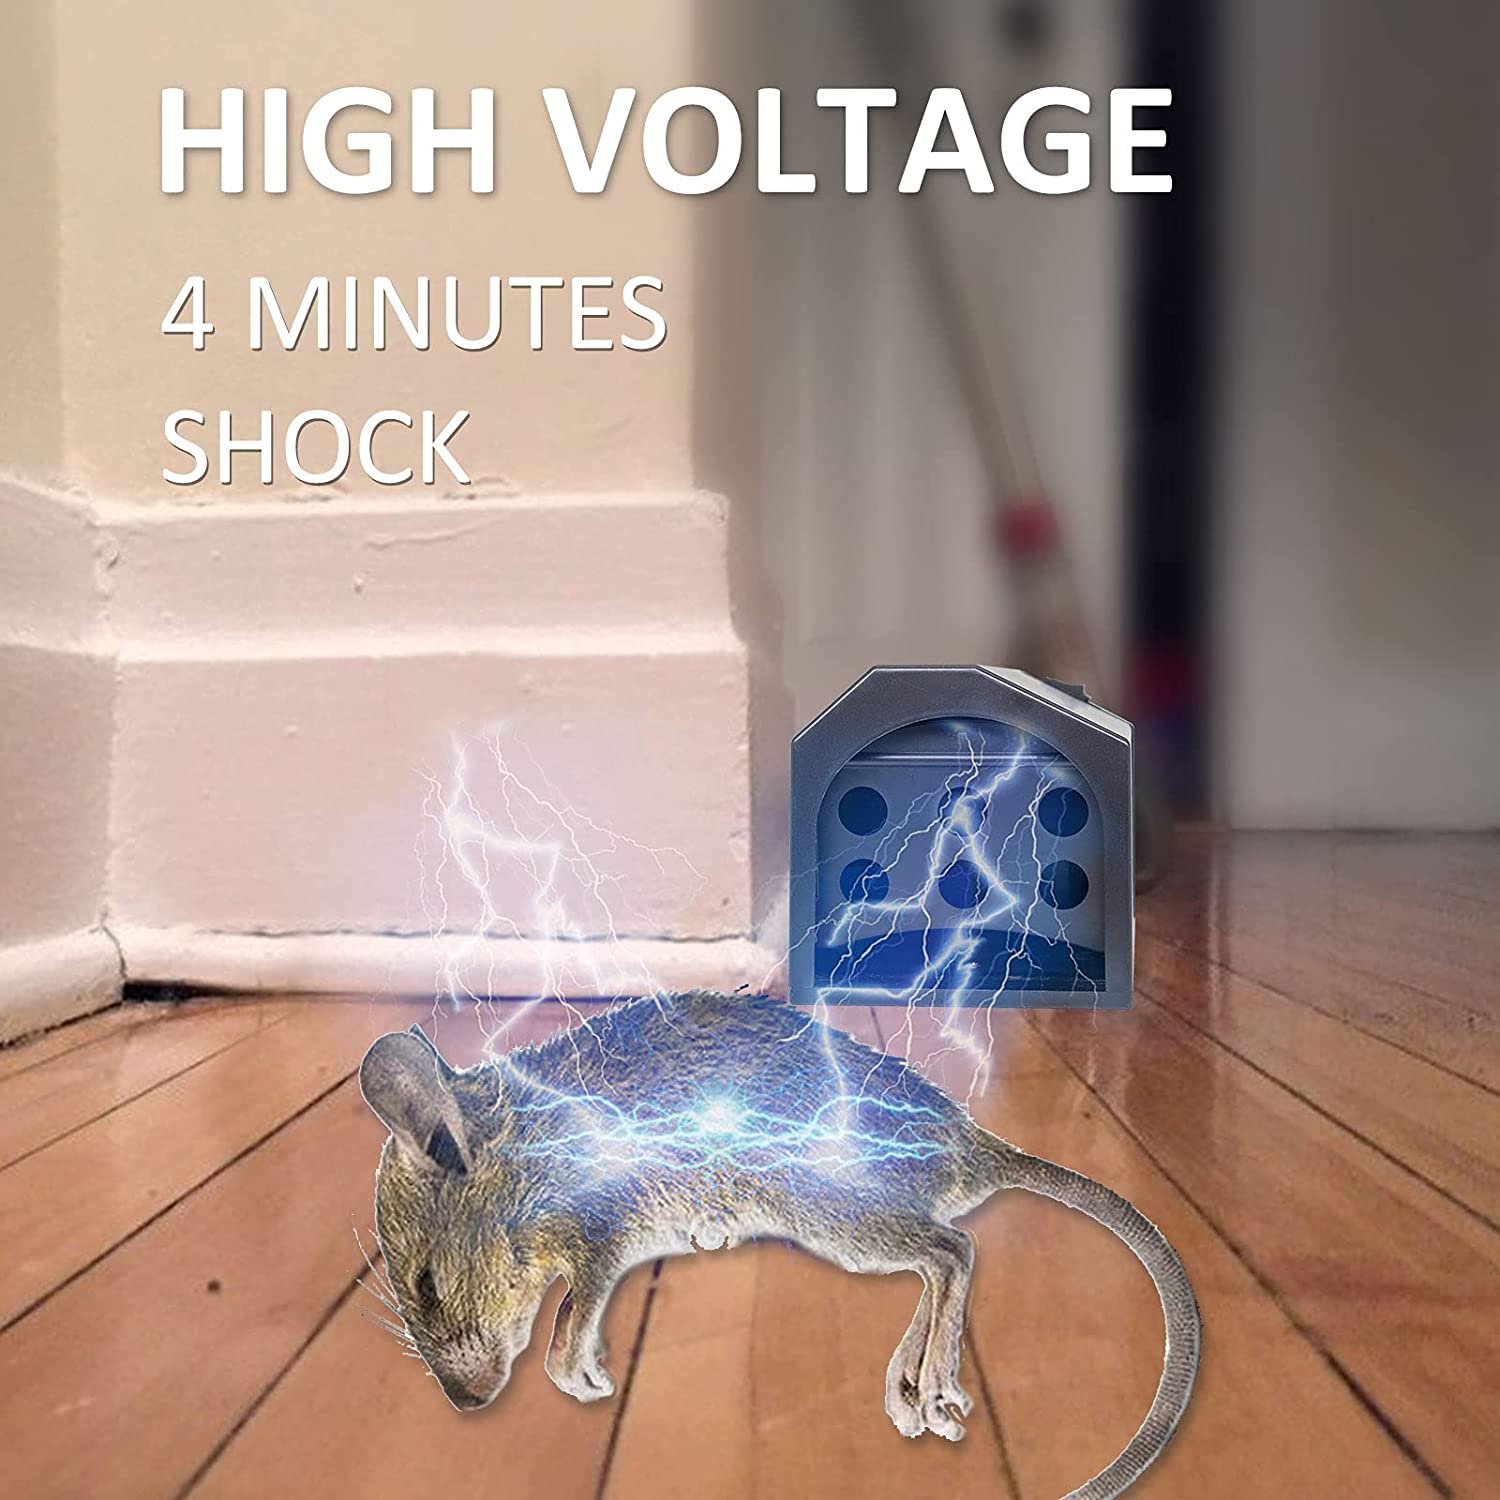 how to make electric mouse rat trap / high voltage, Simple Inventions